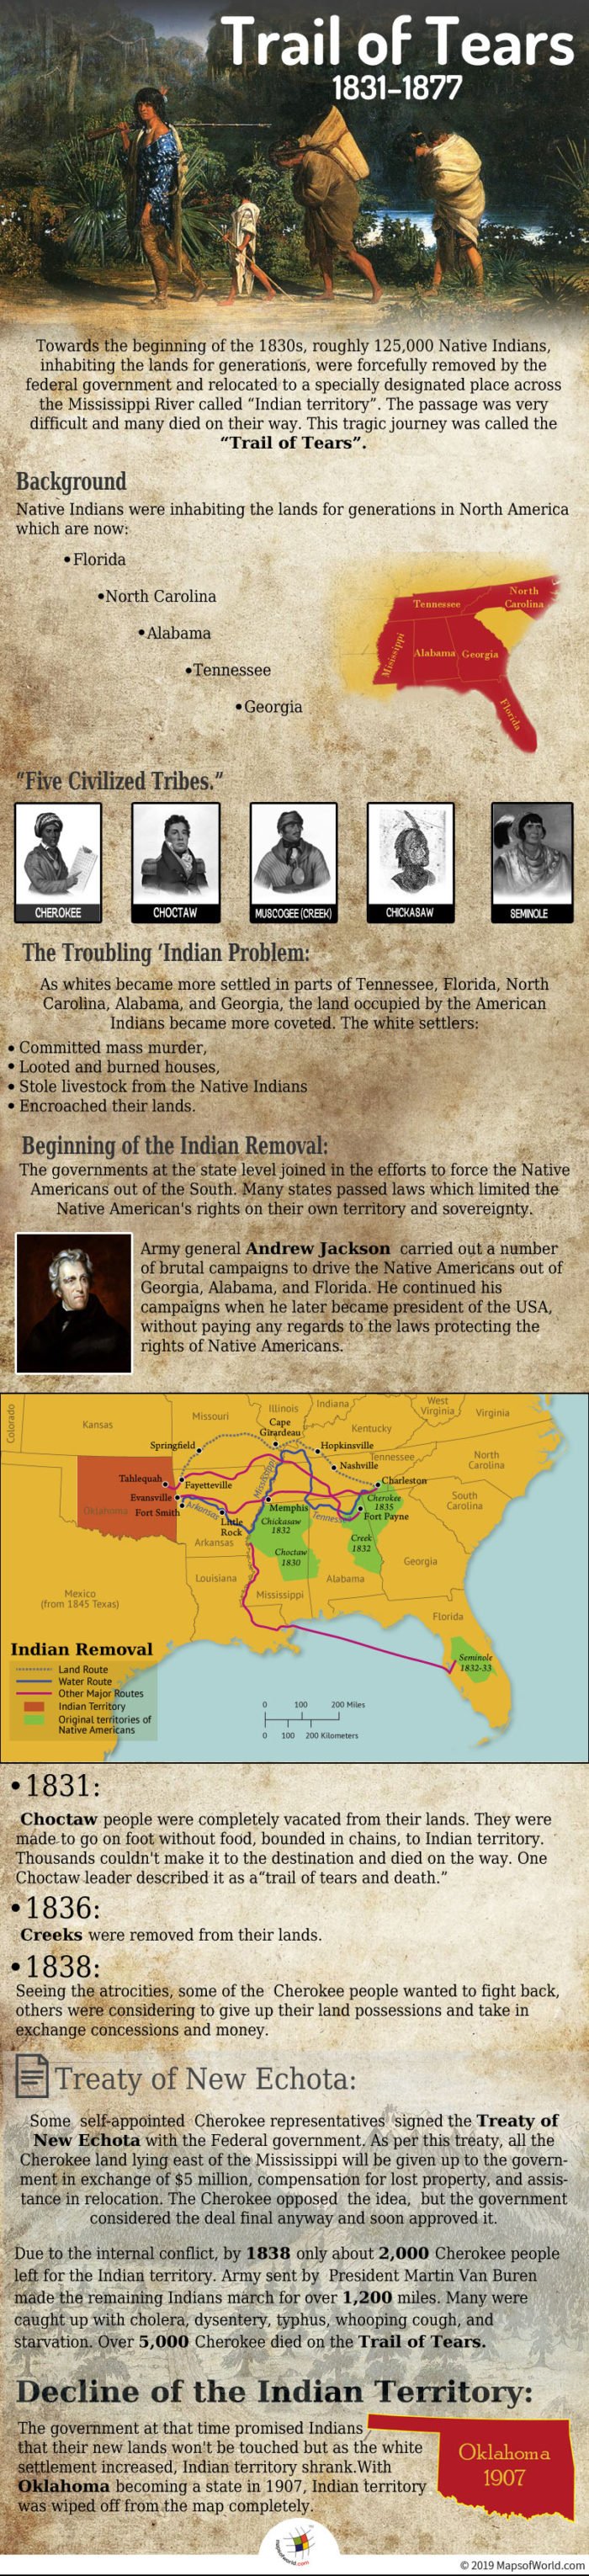 Infographic Giving Details on Trail of Tears